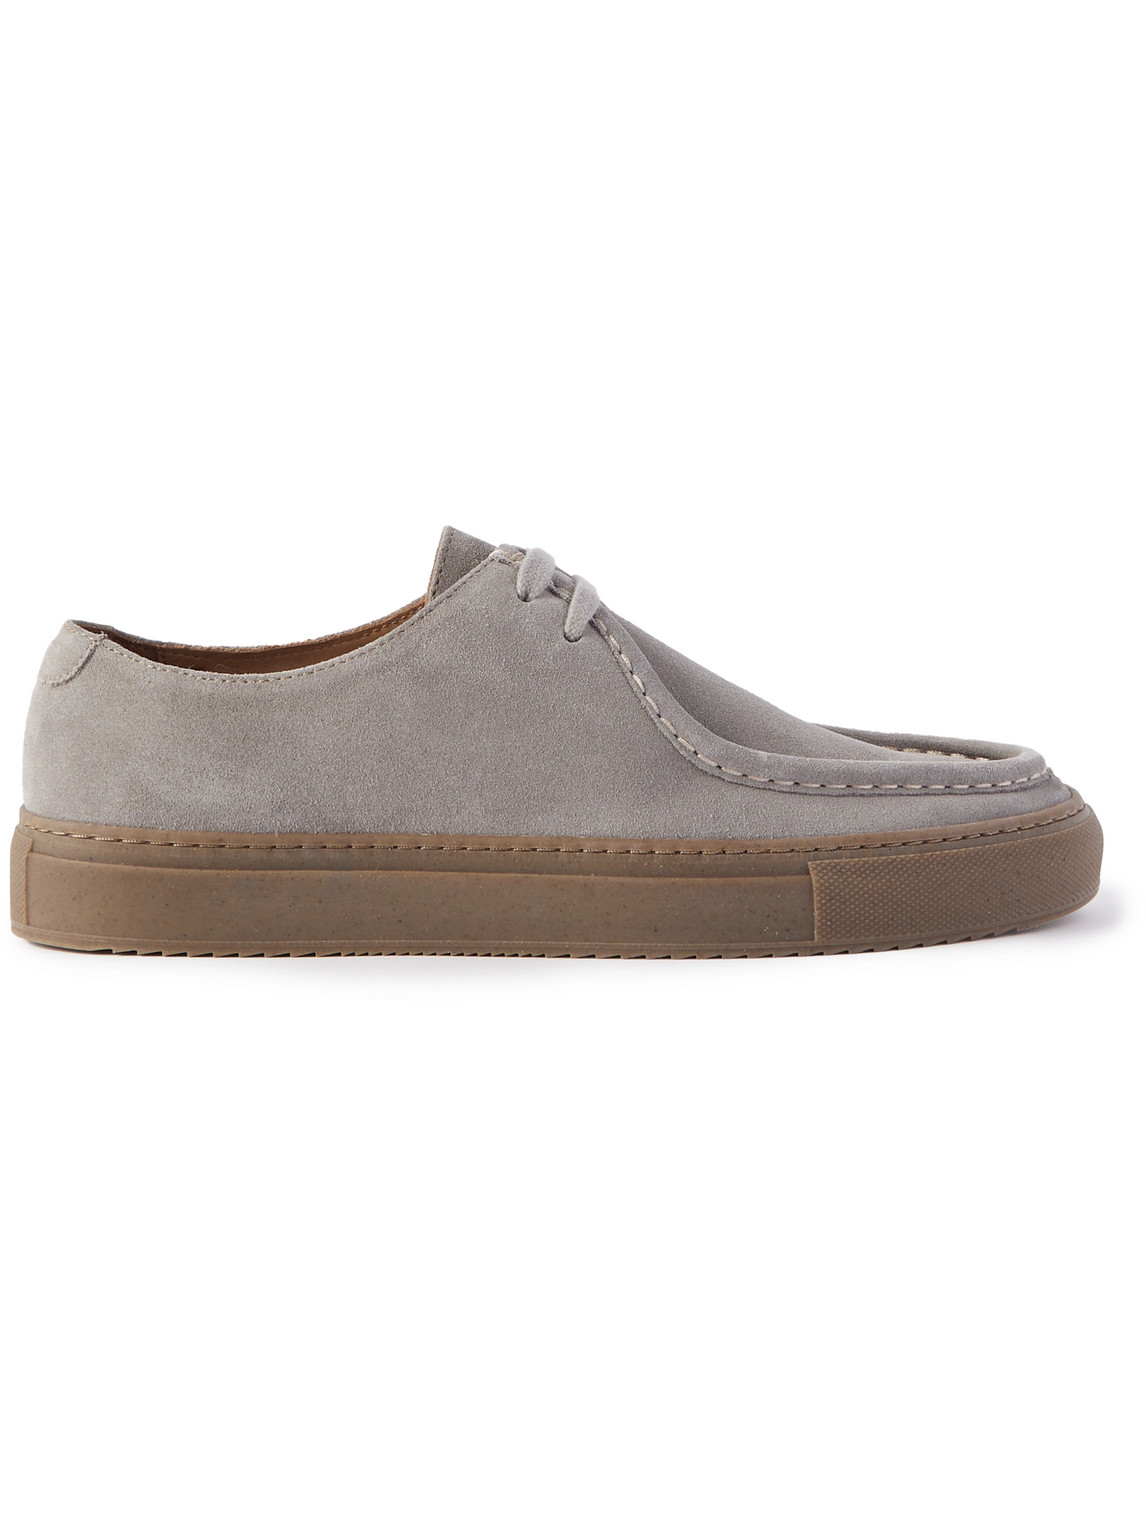 Larry Regenerated Suede by evolo® Derby Shoes